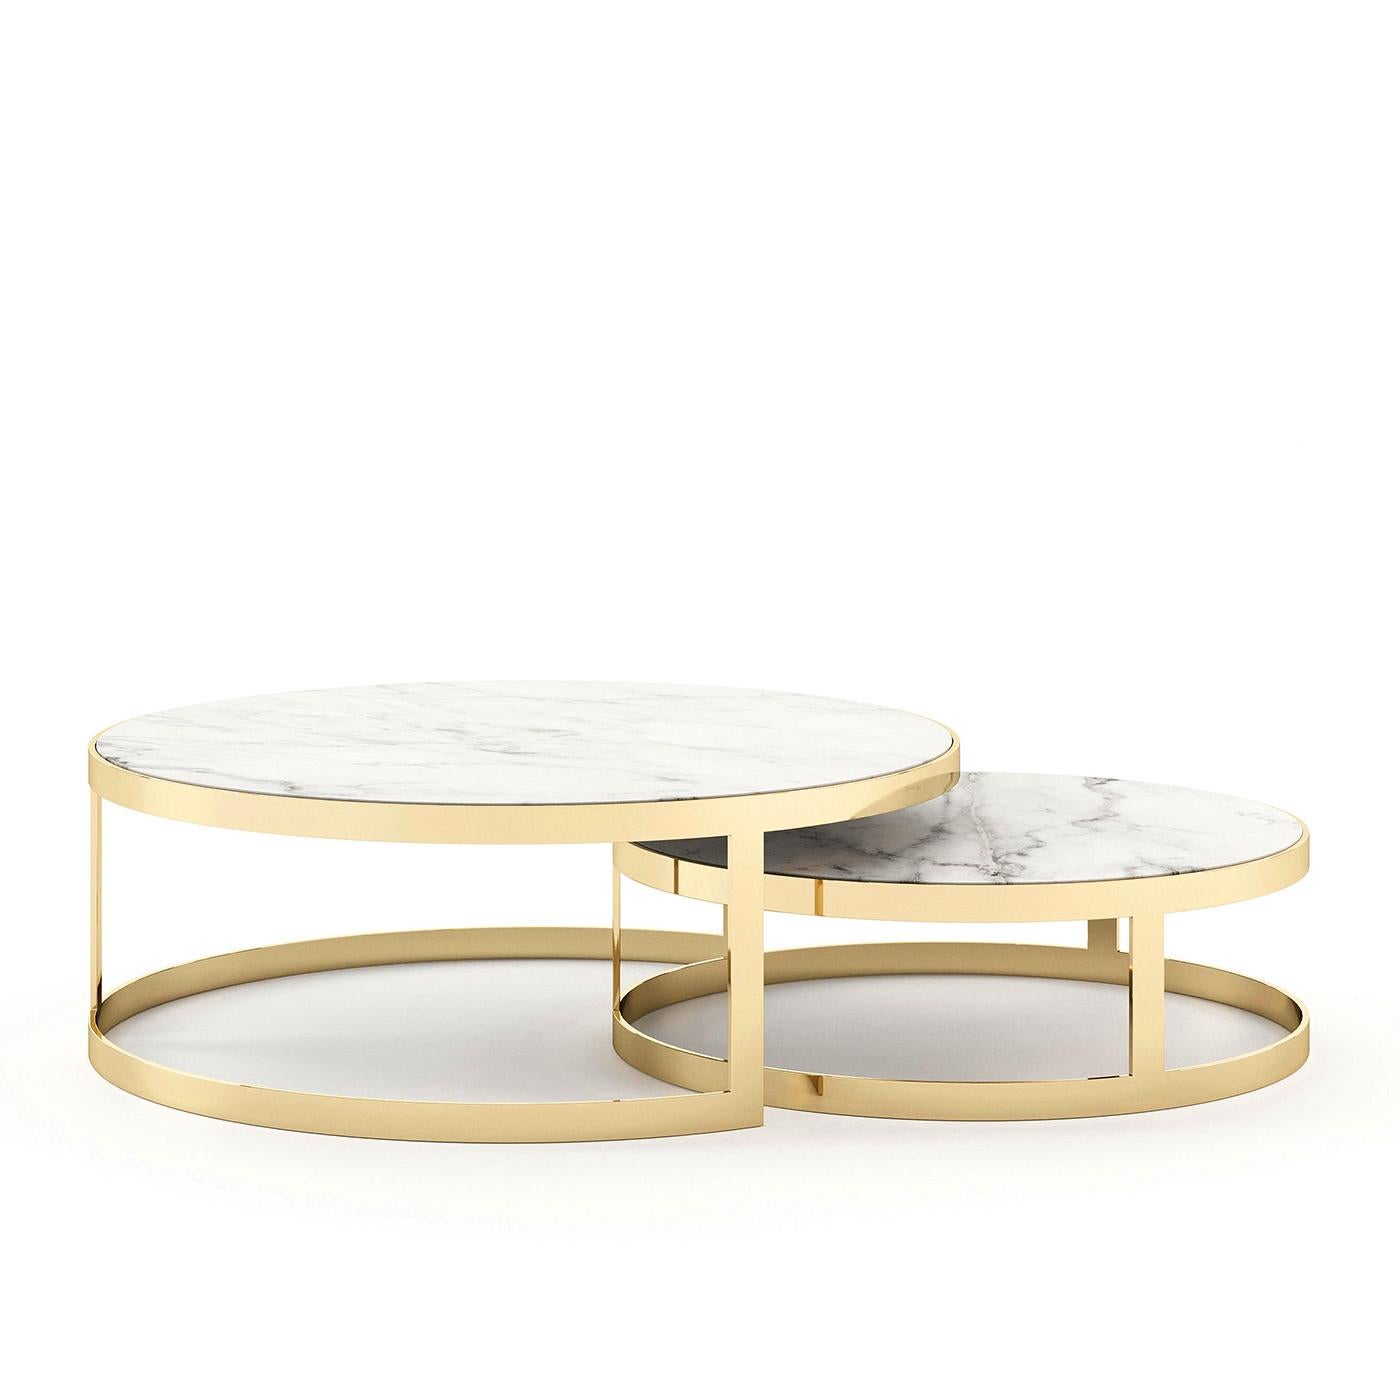 Coffee table Torent set of 2 with 2 coffee tables with
white carrara marble tops and with polished stainless 
steel bases in gold finish.
Measures: A/ Diameter 100cm x Height 35cm,
B/ Diameter 80cm x Height 25cm.

